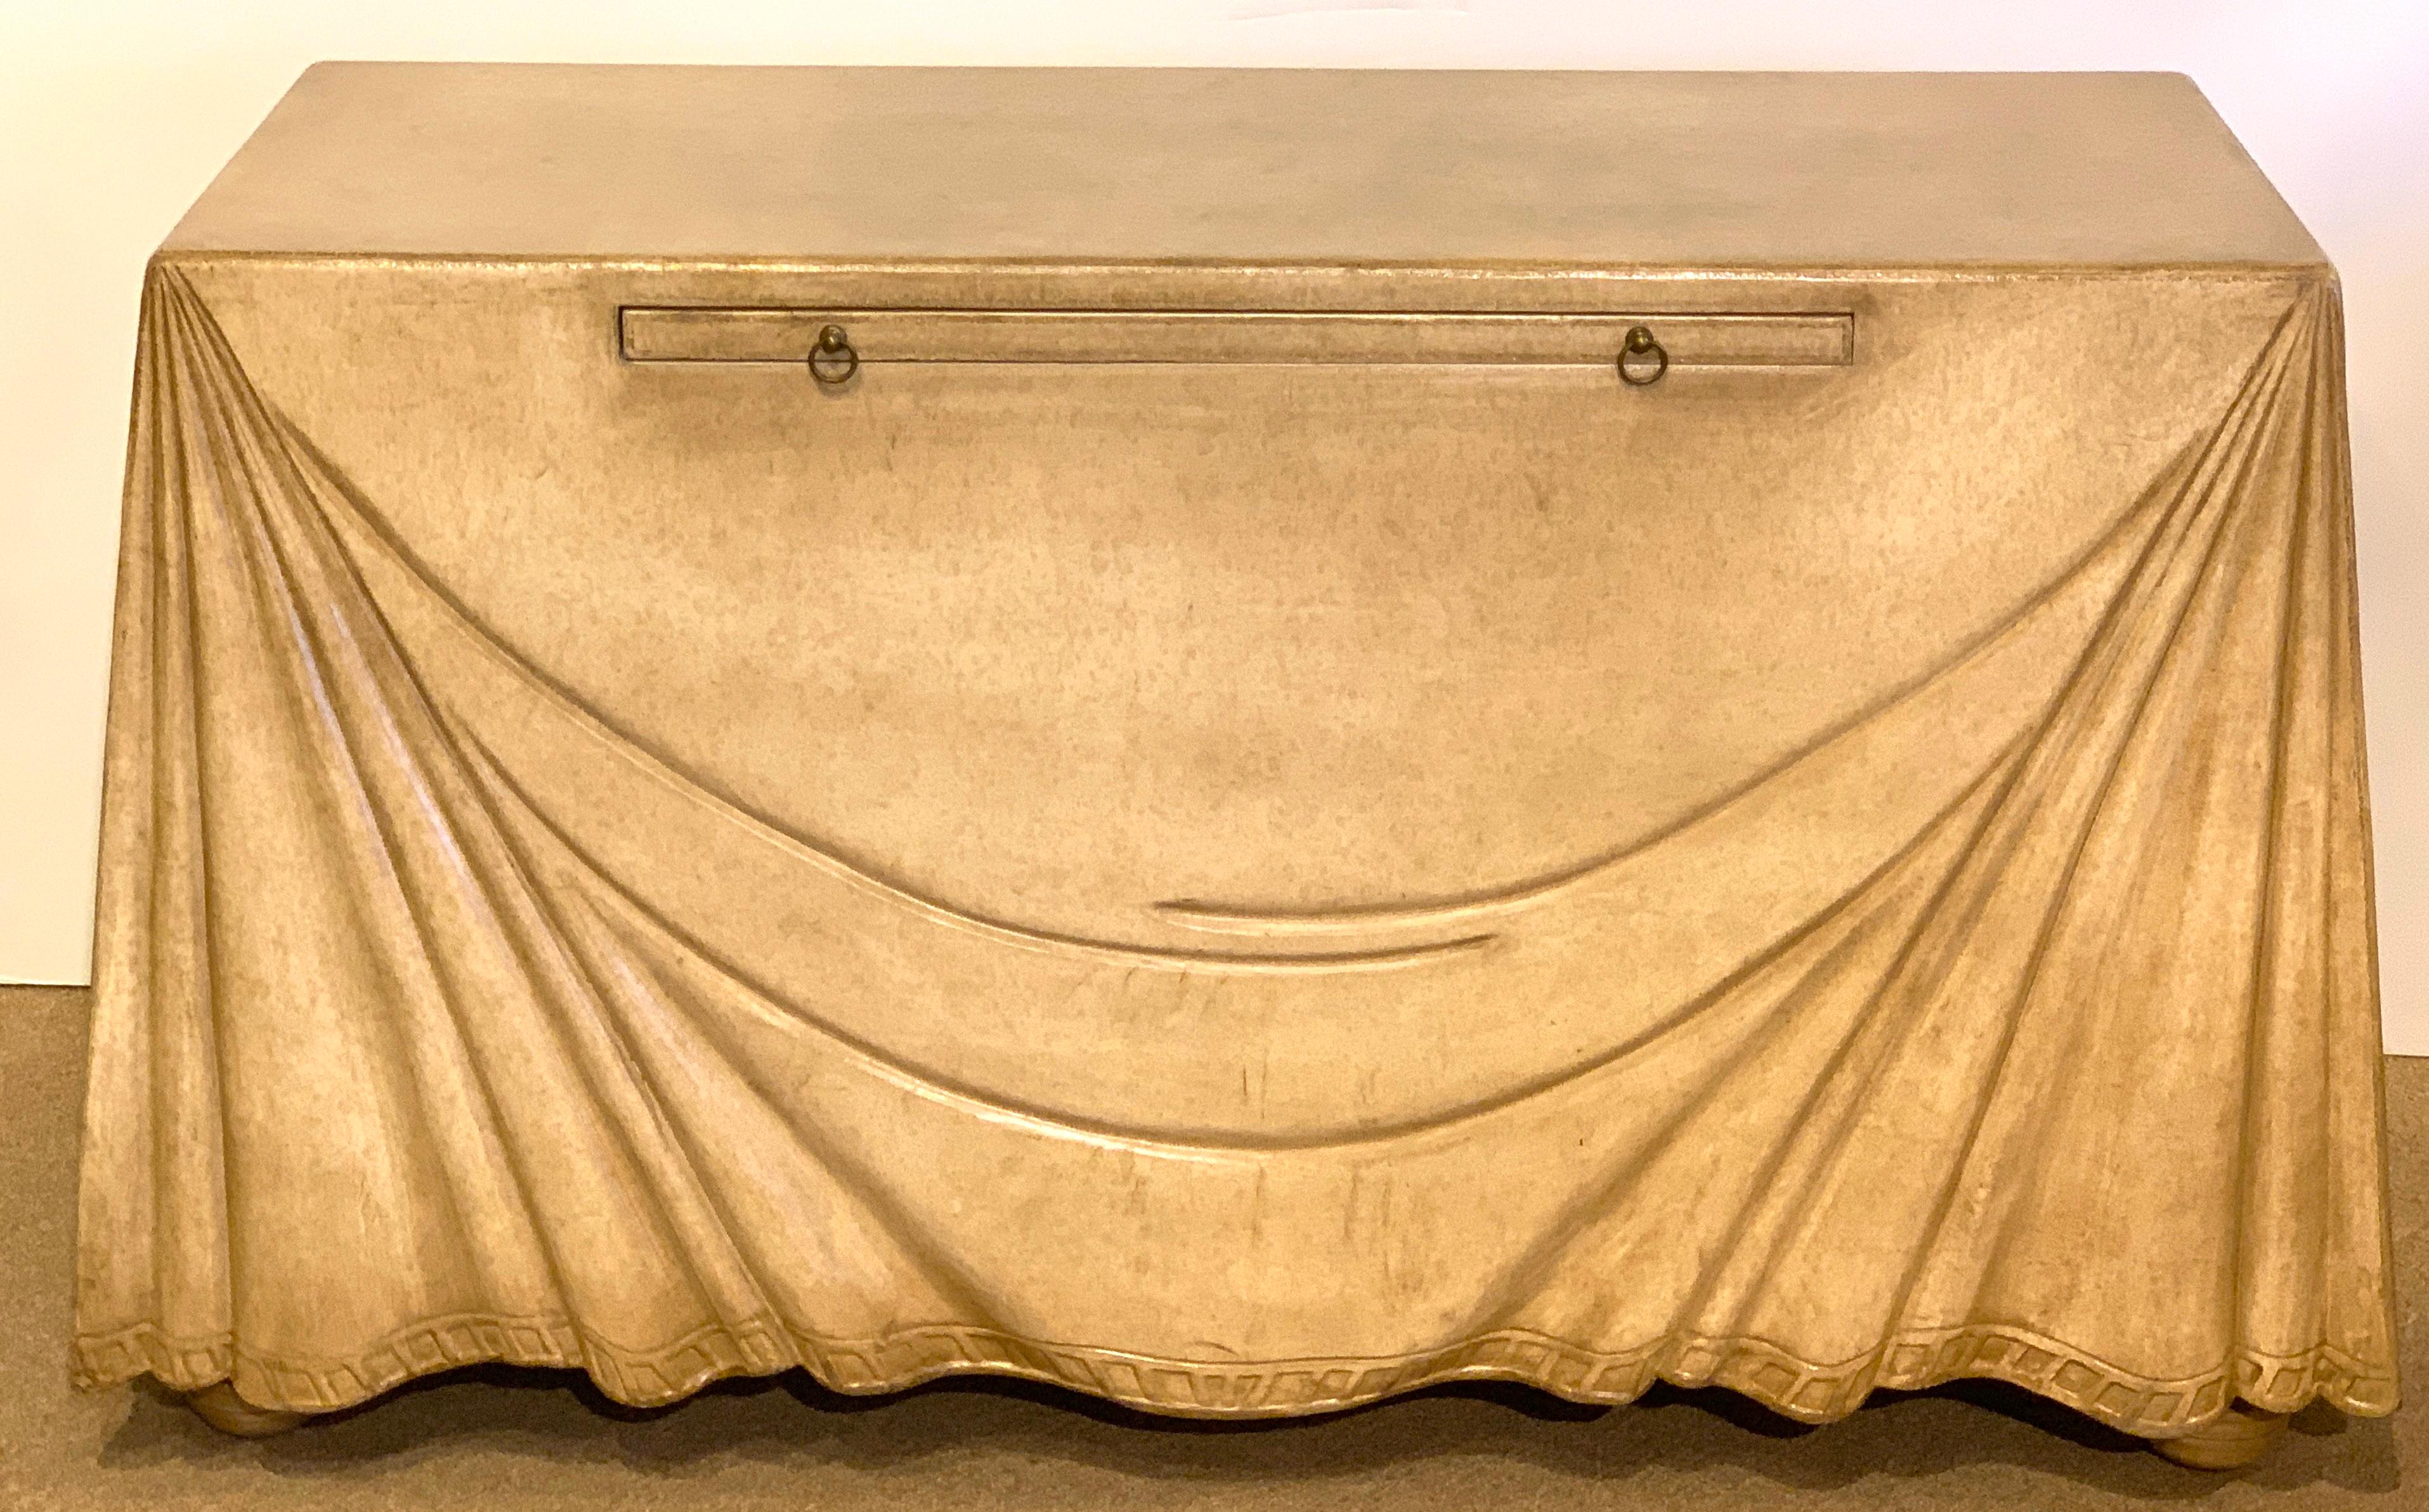 Stunning Aldo Tura Parchment leather Trompe l'oeil Draped console with pullout writing slide. The realistically carved case completely covered in subtle parchment leather.